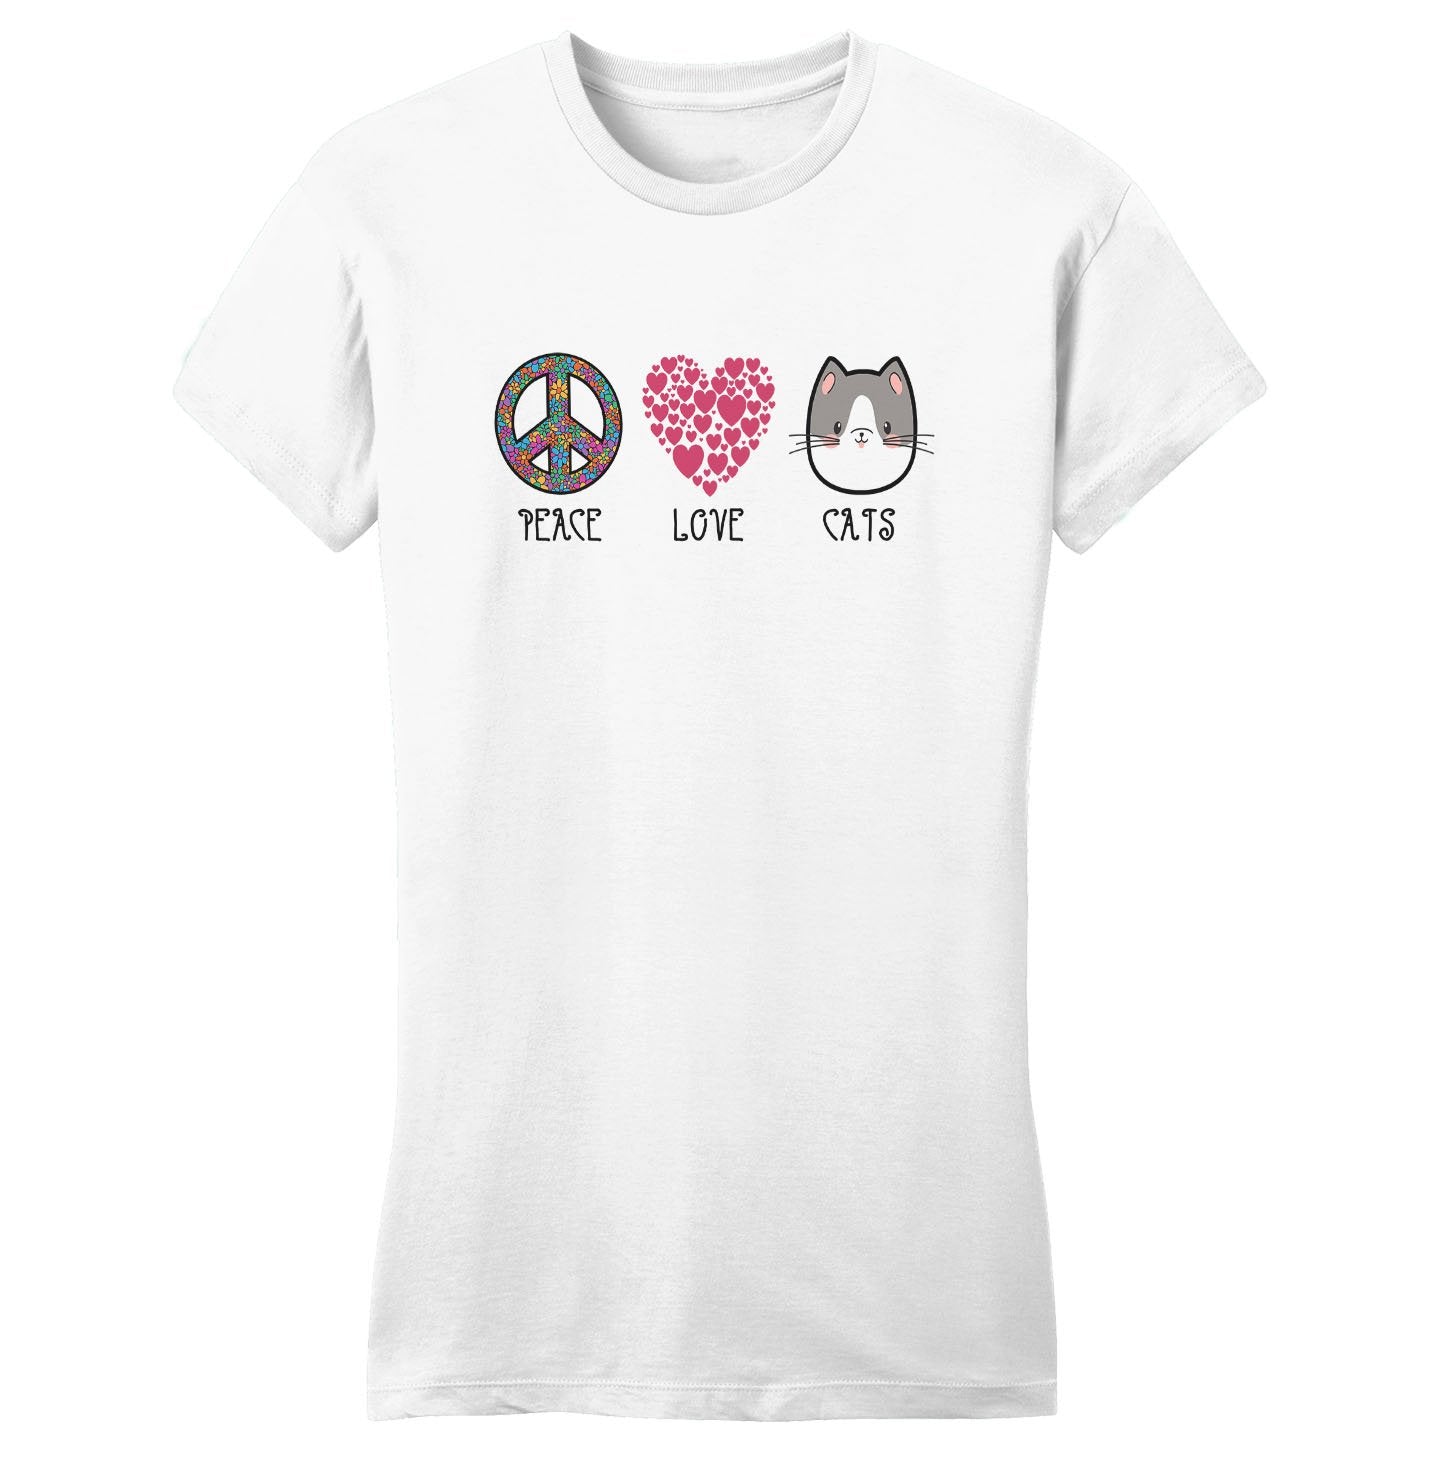 Peace Love Cats - Women's Fitted T-Shirt